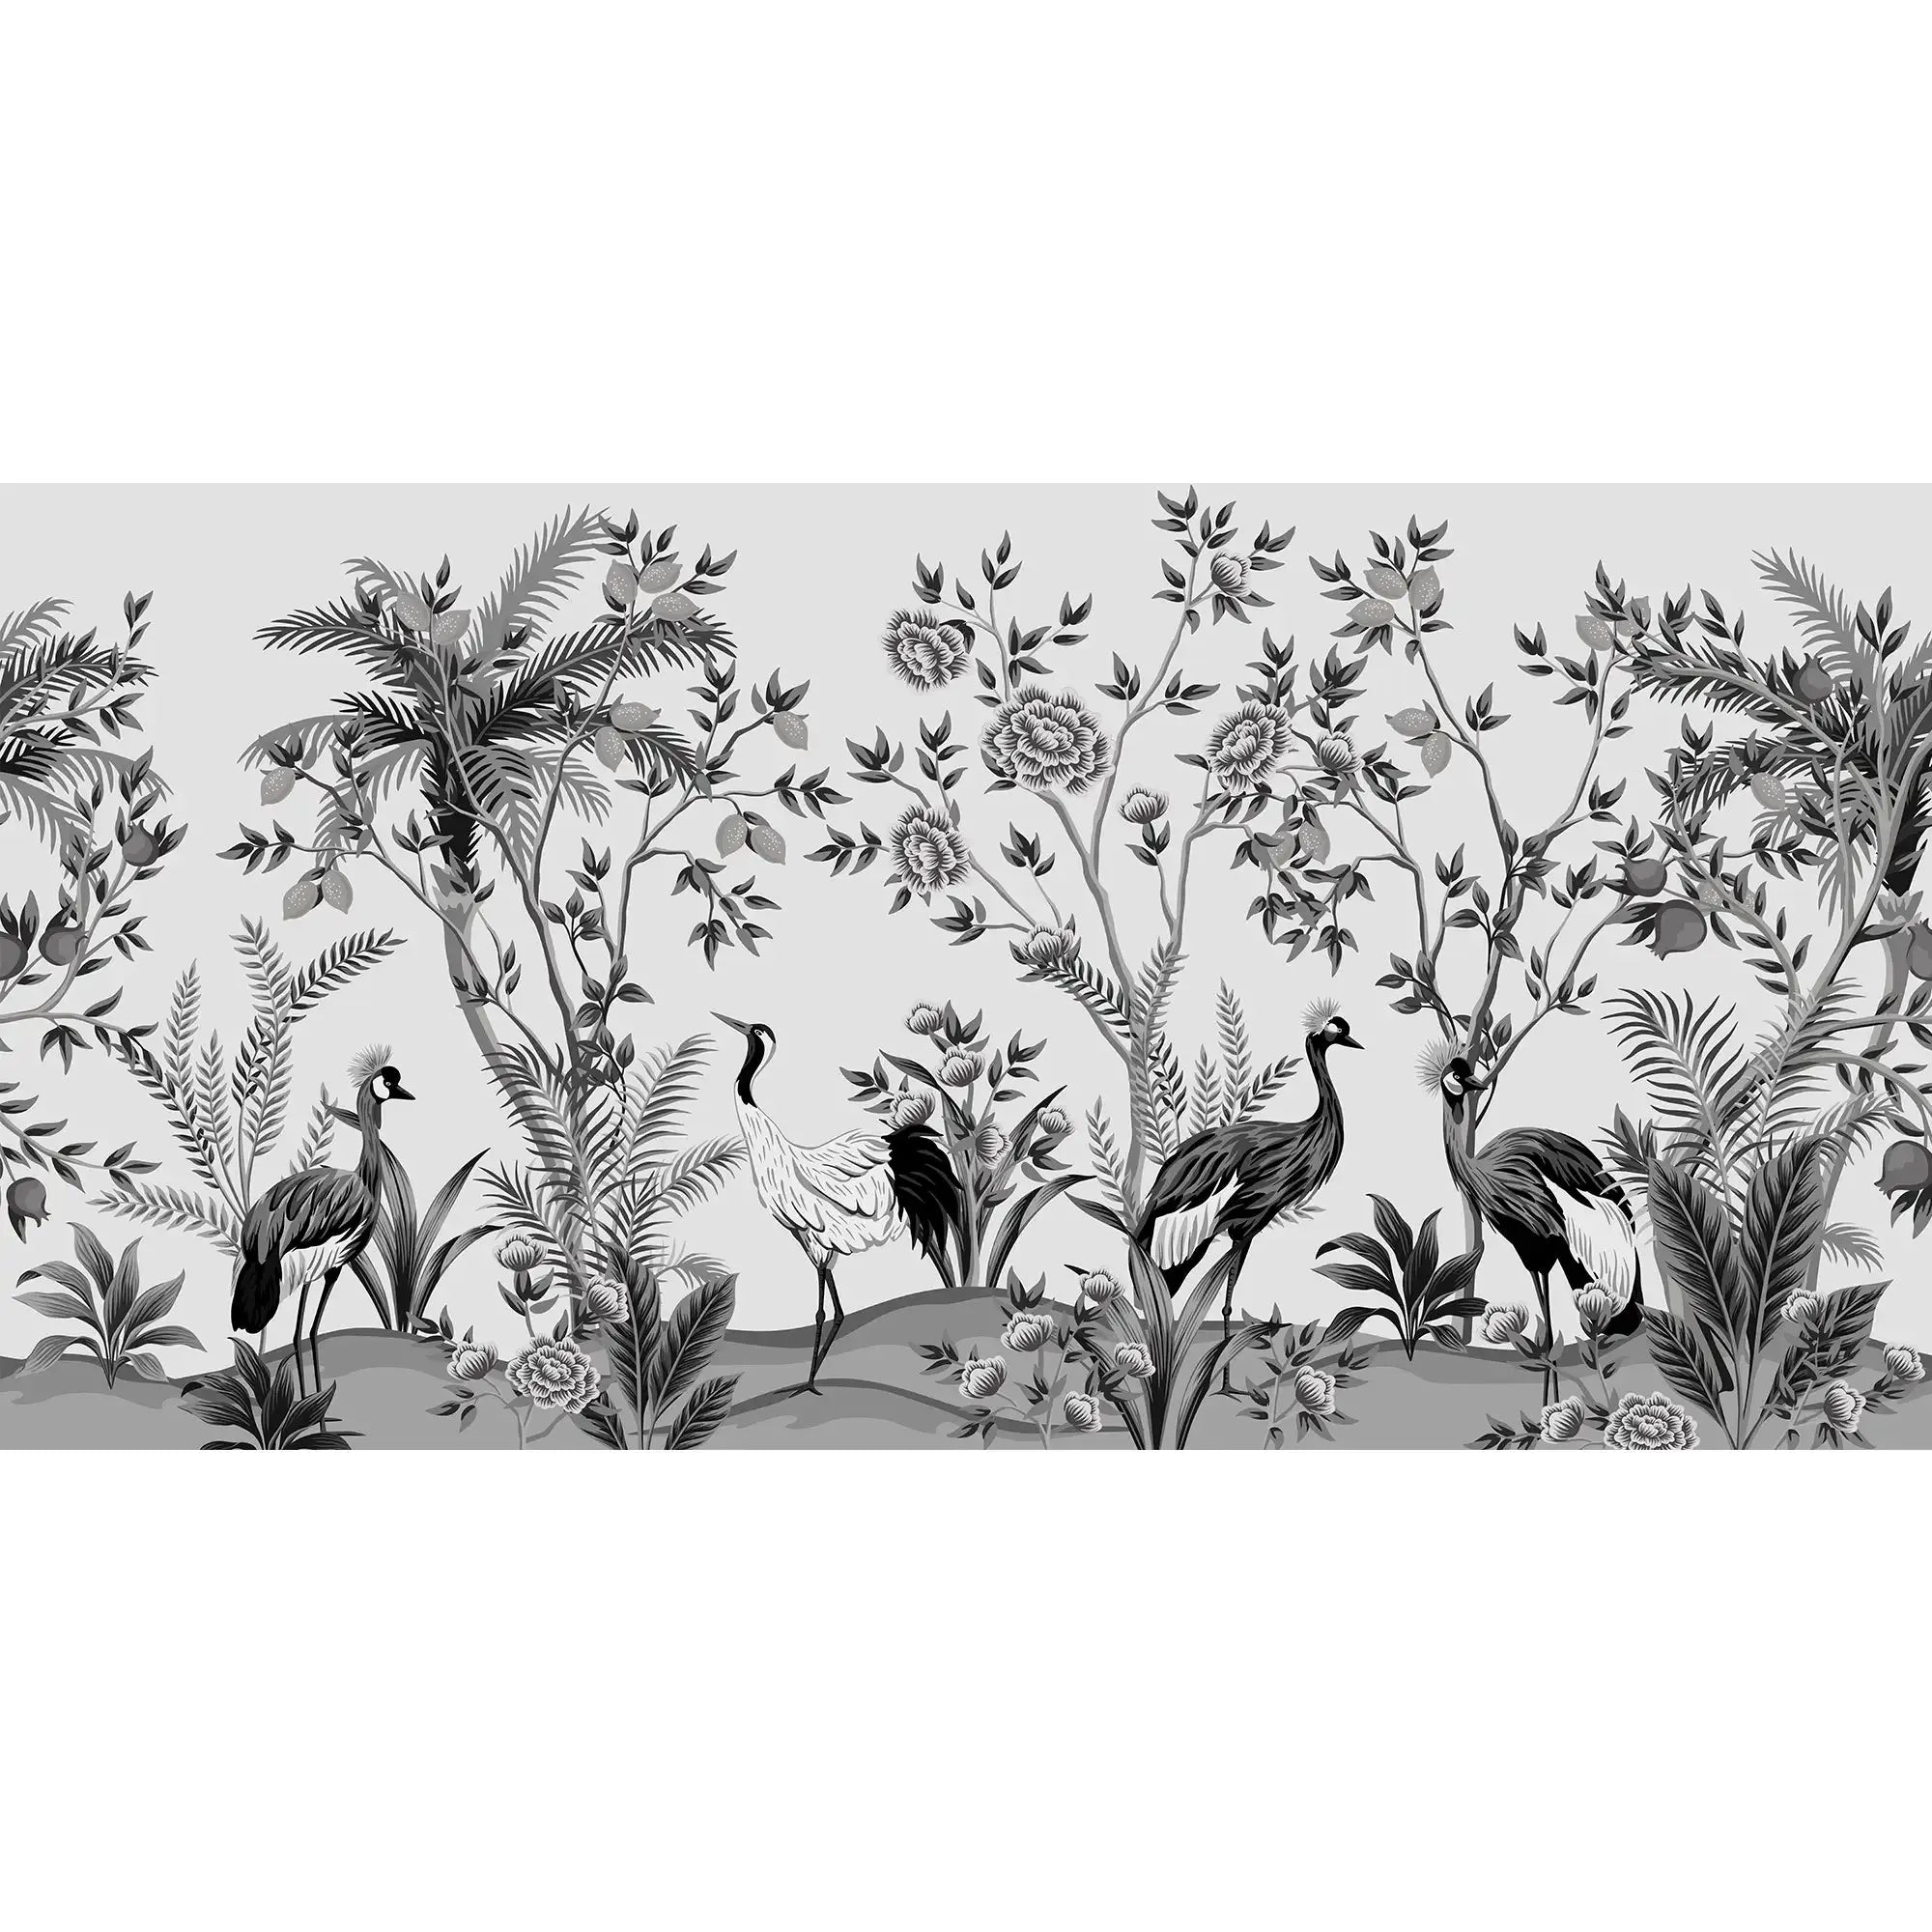 3107-E / Peelable Asian Wallpaper - Oriental Style with Cranes and Flowers - Easy Install Wall Mural - Artevella